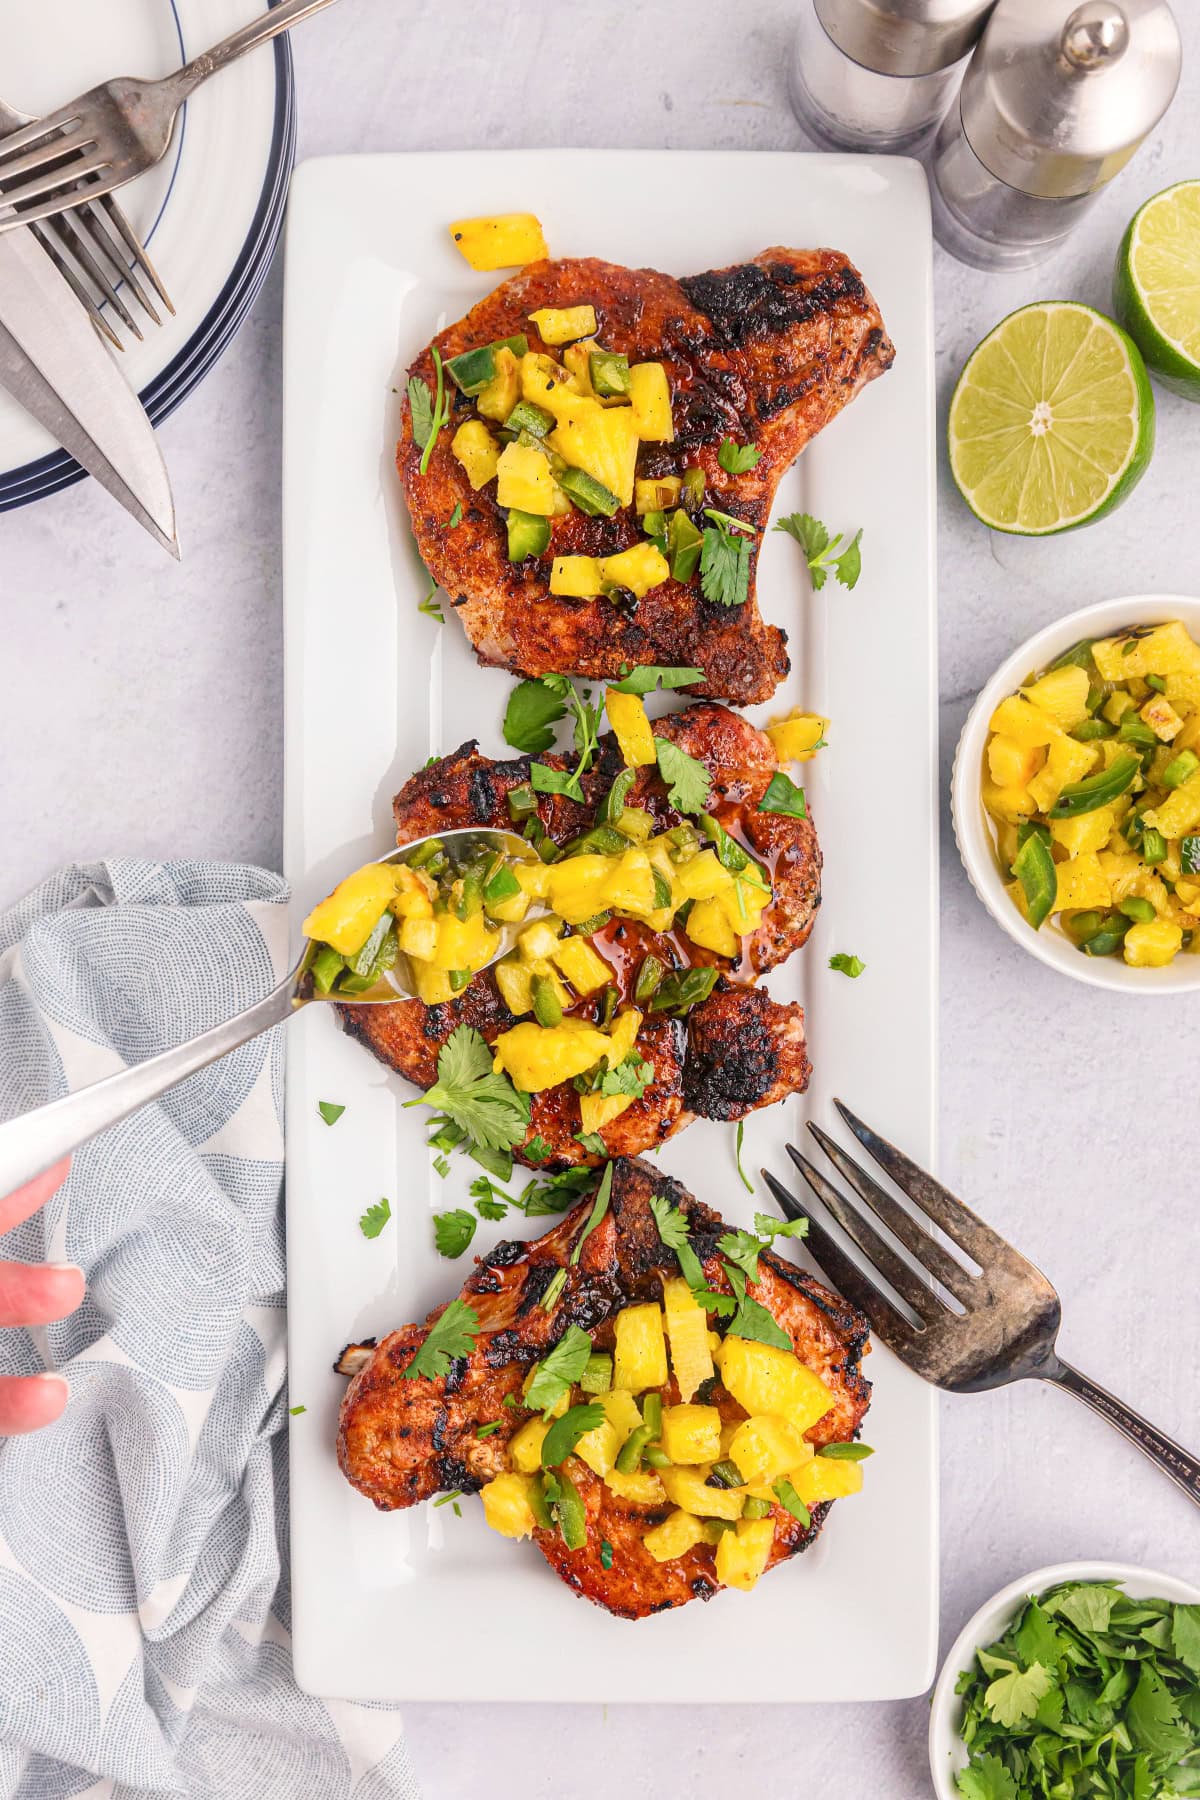 chili rubbed pork chops topped with pineapple salsa on platter